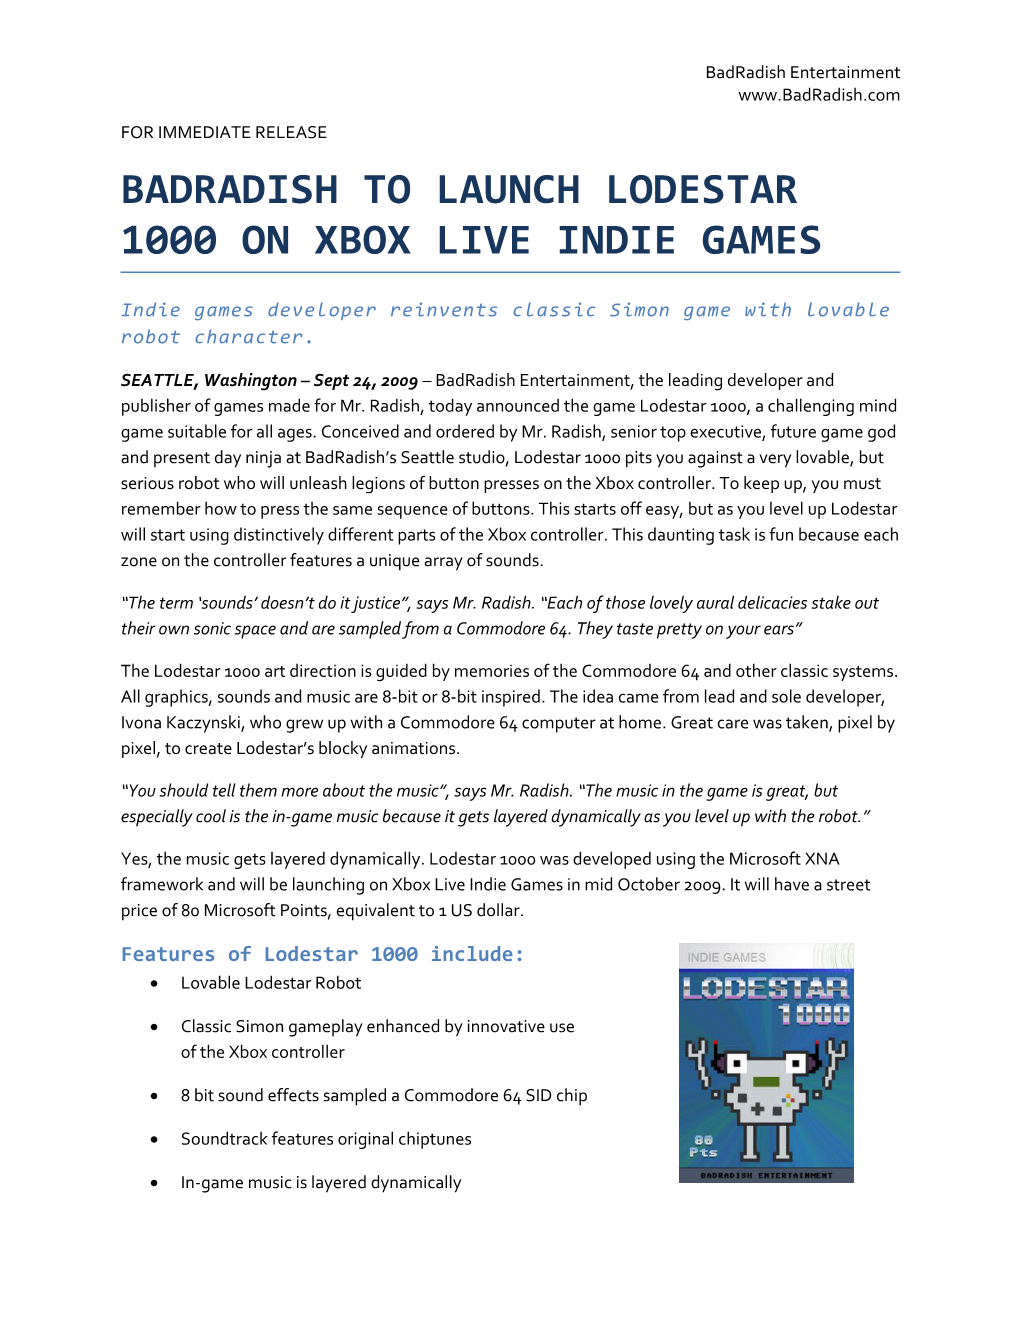 Badradish to Launch Lodestar 1000 on Xbox Live Indie Games